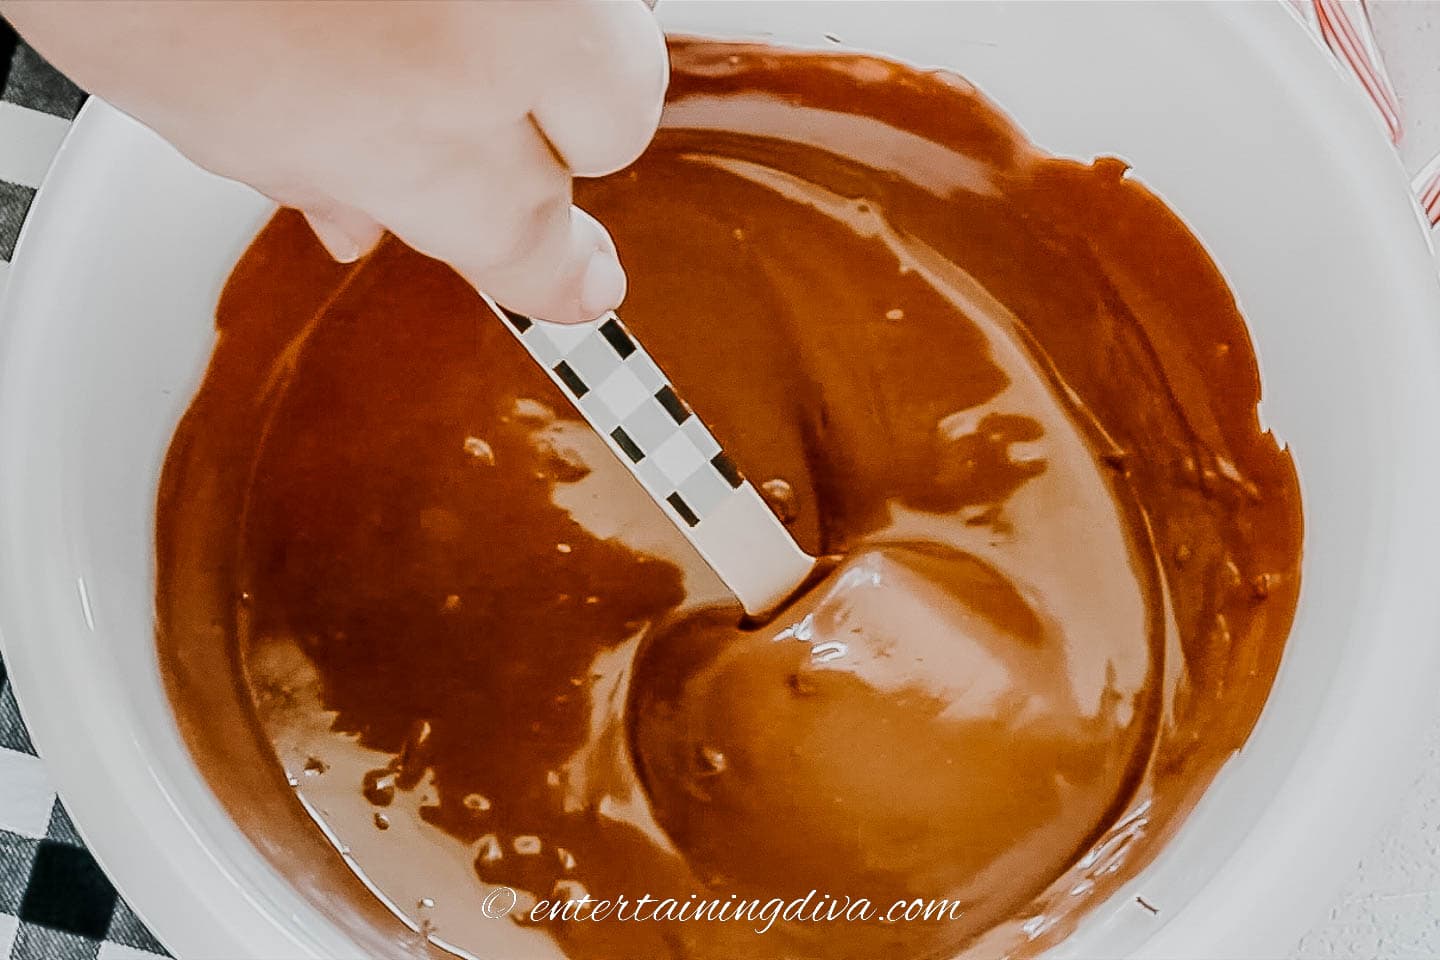 wooden spoon being dipped in melted chocolate